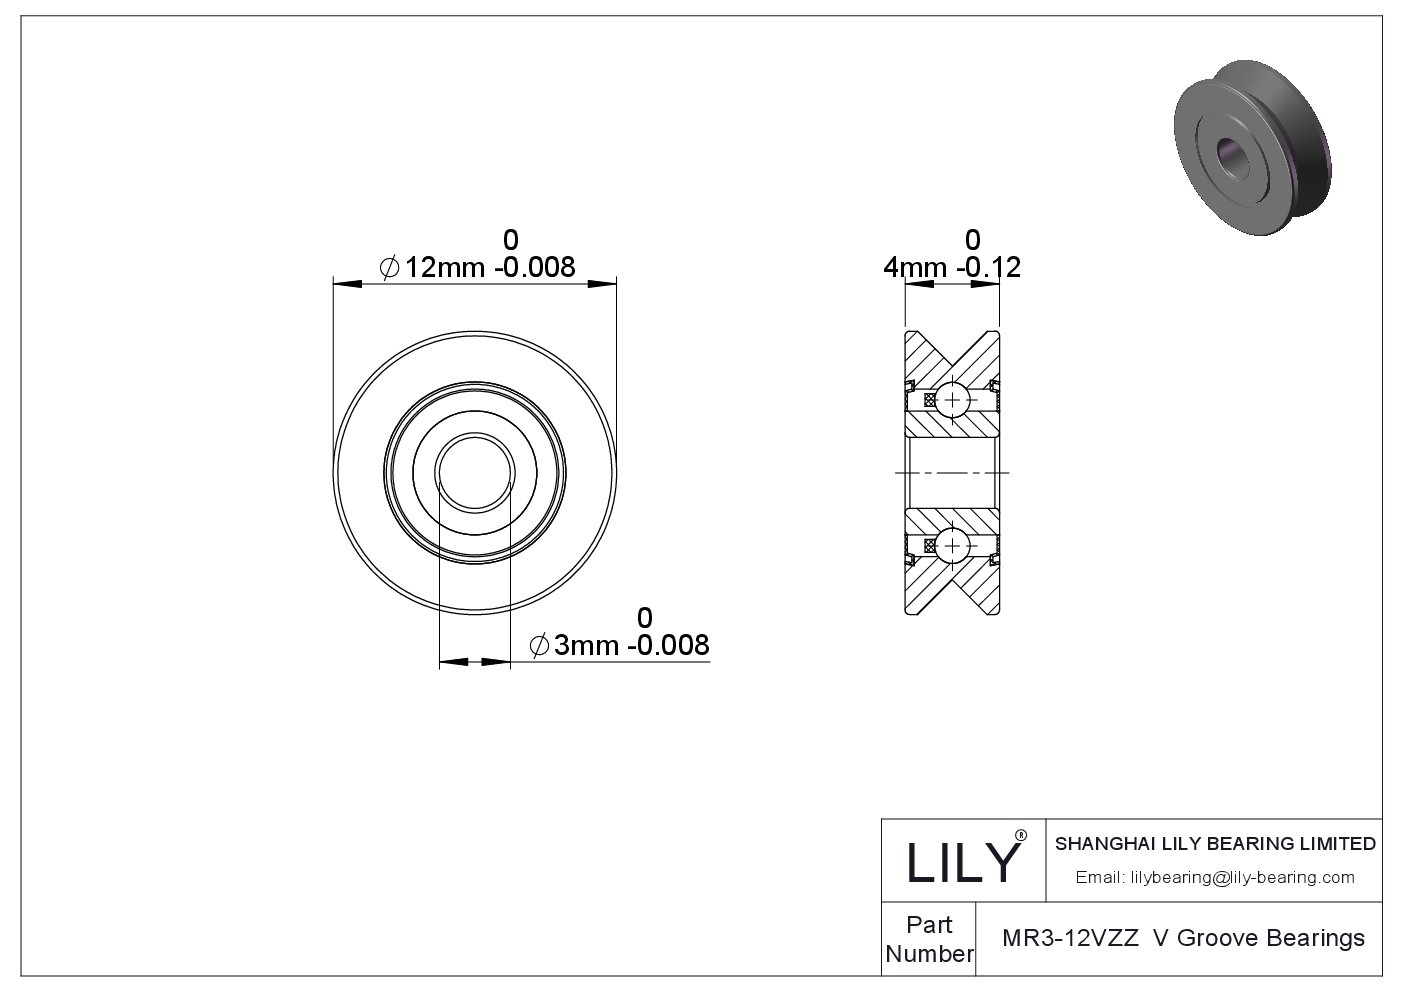 MR3-12VZZ V Groove Bearings cad drawing